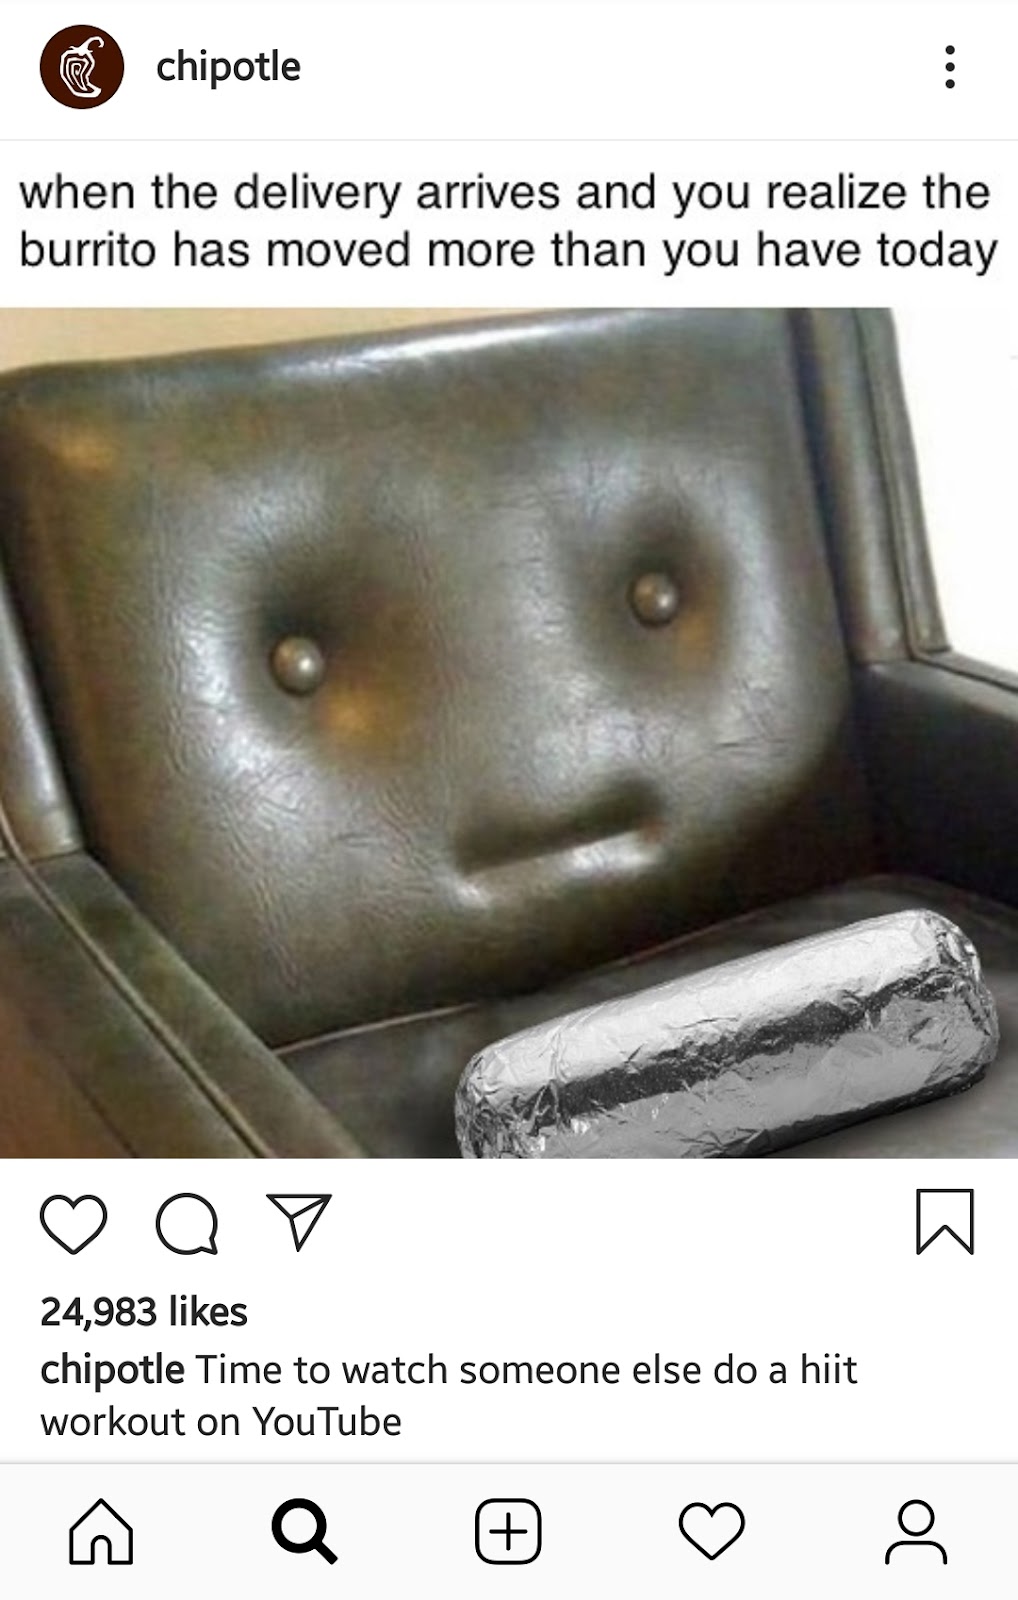 Chipotle, an example of humor brand voice on Instagram